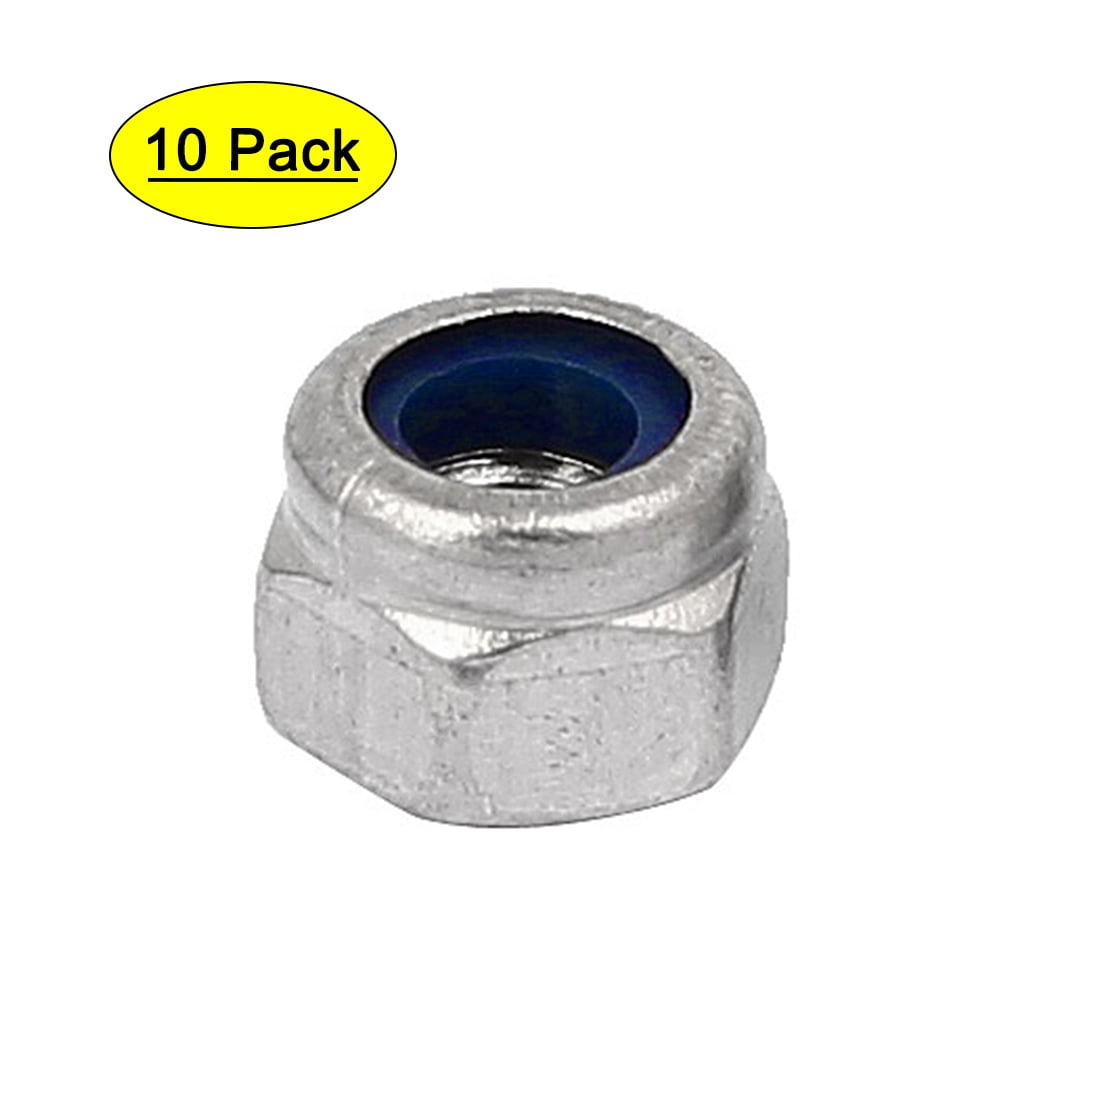 Stainless Steel A2 M8 x 1.25 Nylon Insert Lock 304 Nut  pack of 10 